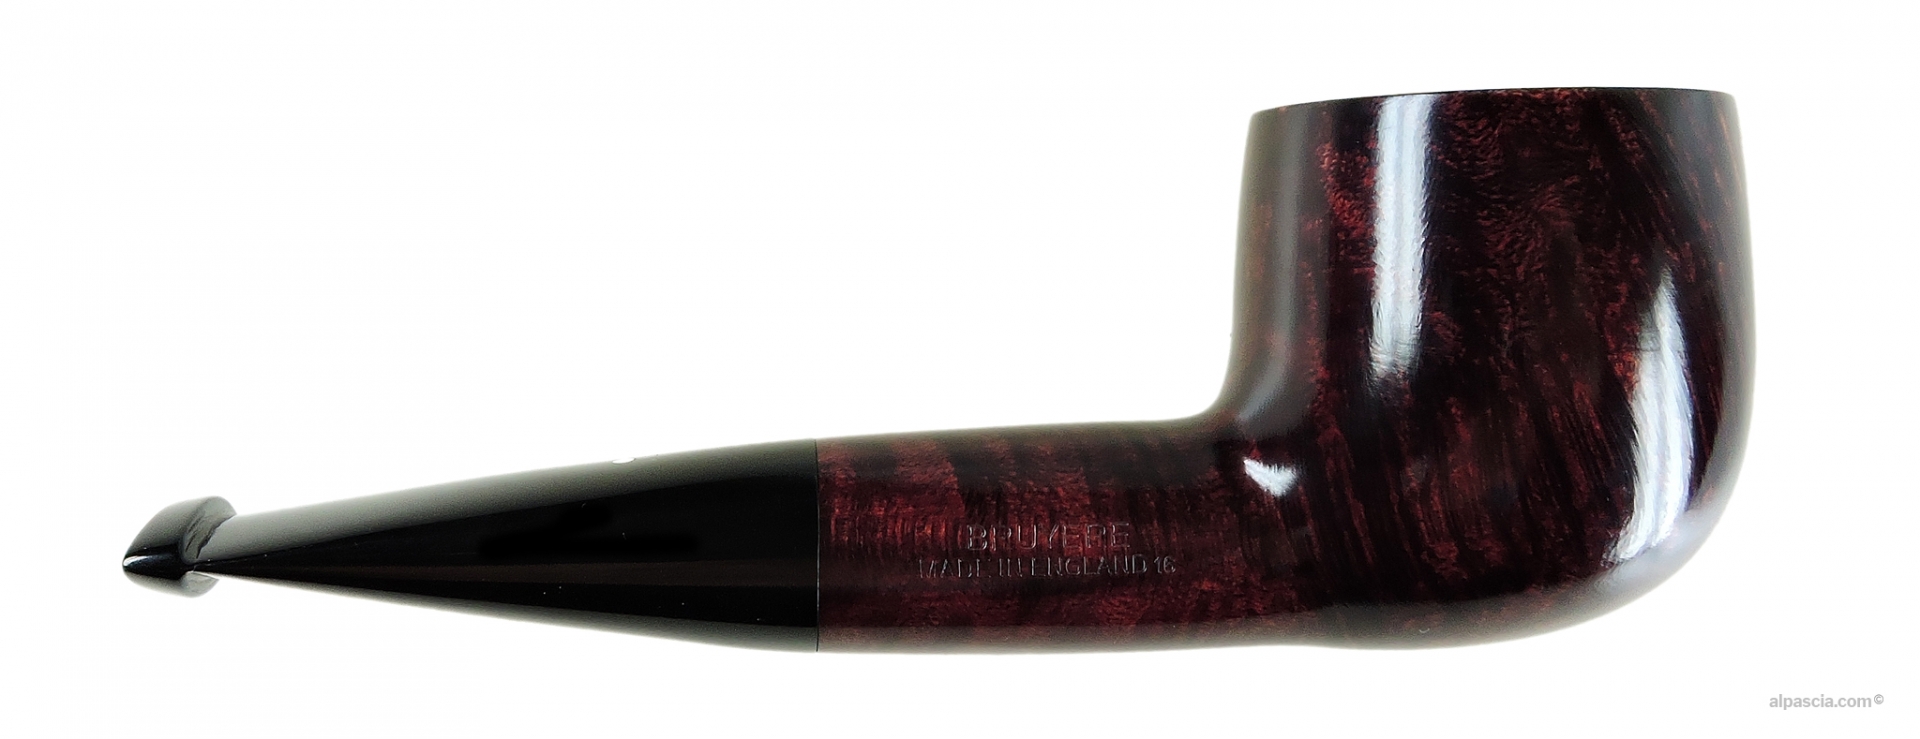 Al Pascià - Dunhill Stubby Amber Root 4106F Group 4 smoking pipe